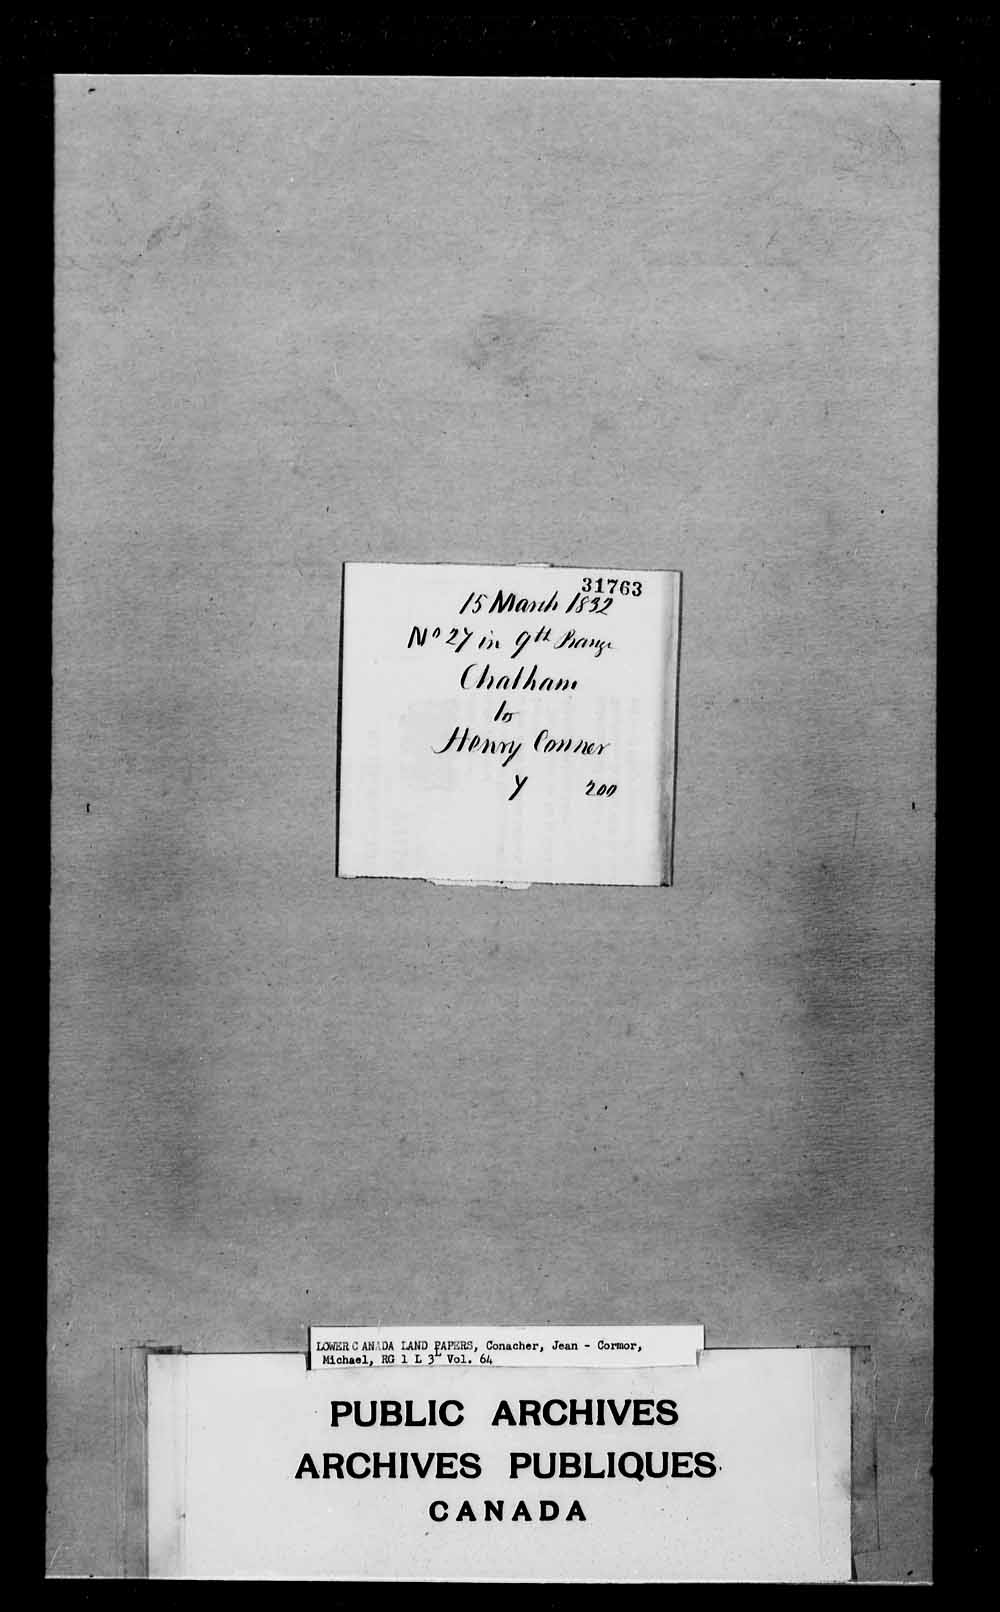 Digitized page of  for Image No.: e006616414